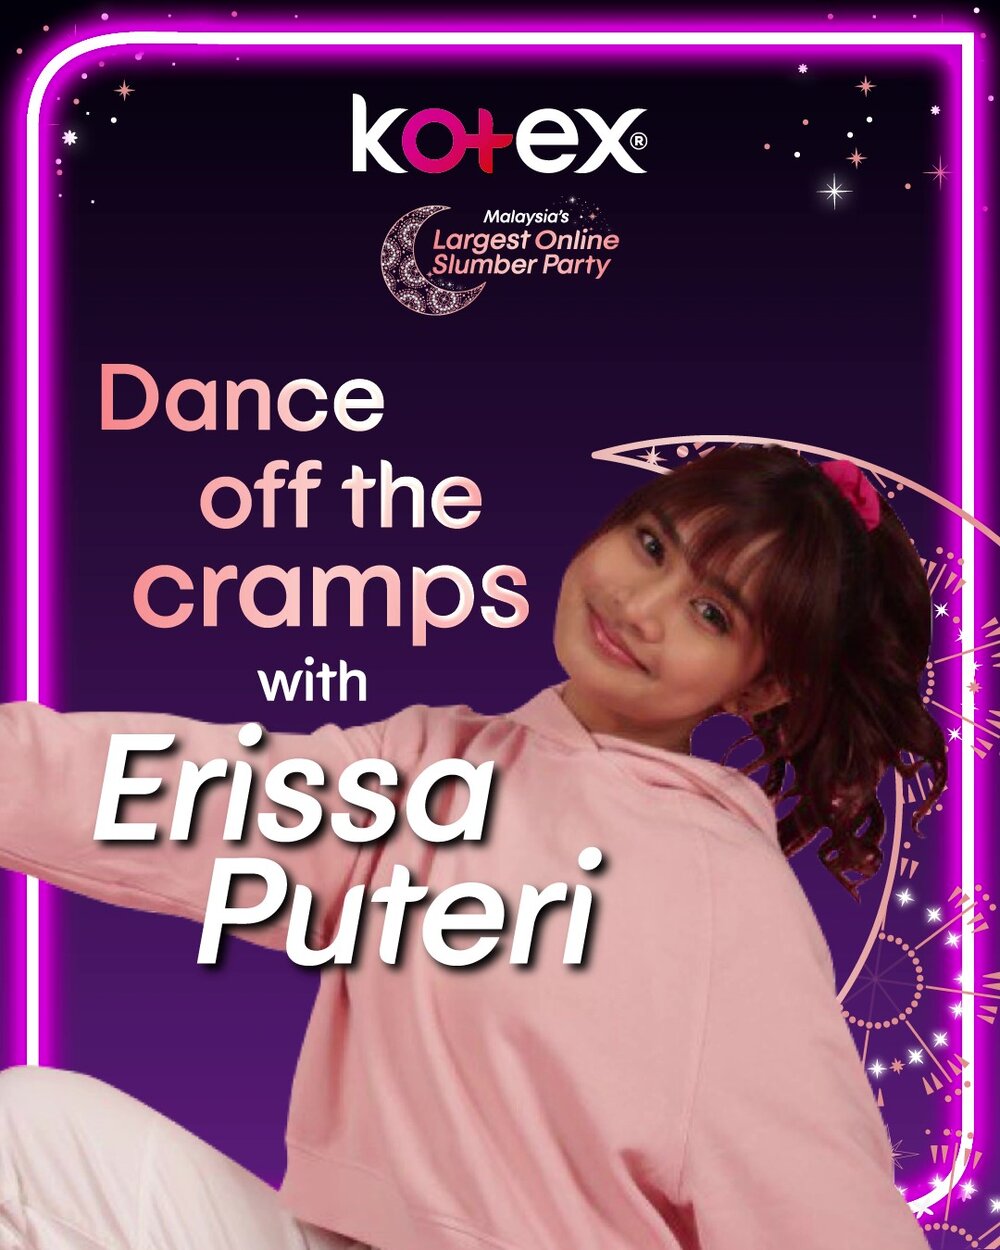 Kotex Slumber Party Poster- Dance Off The Cramps with Erissa.jpg